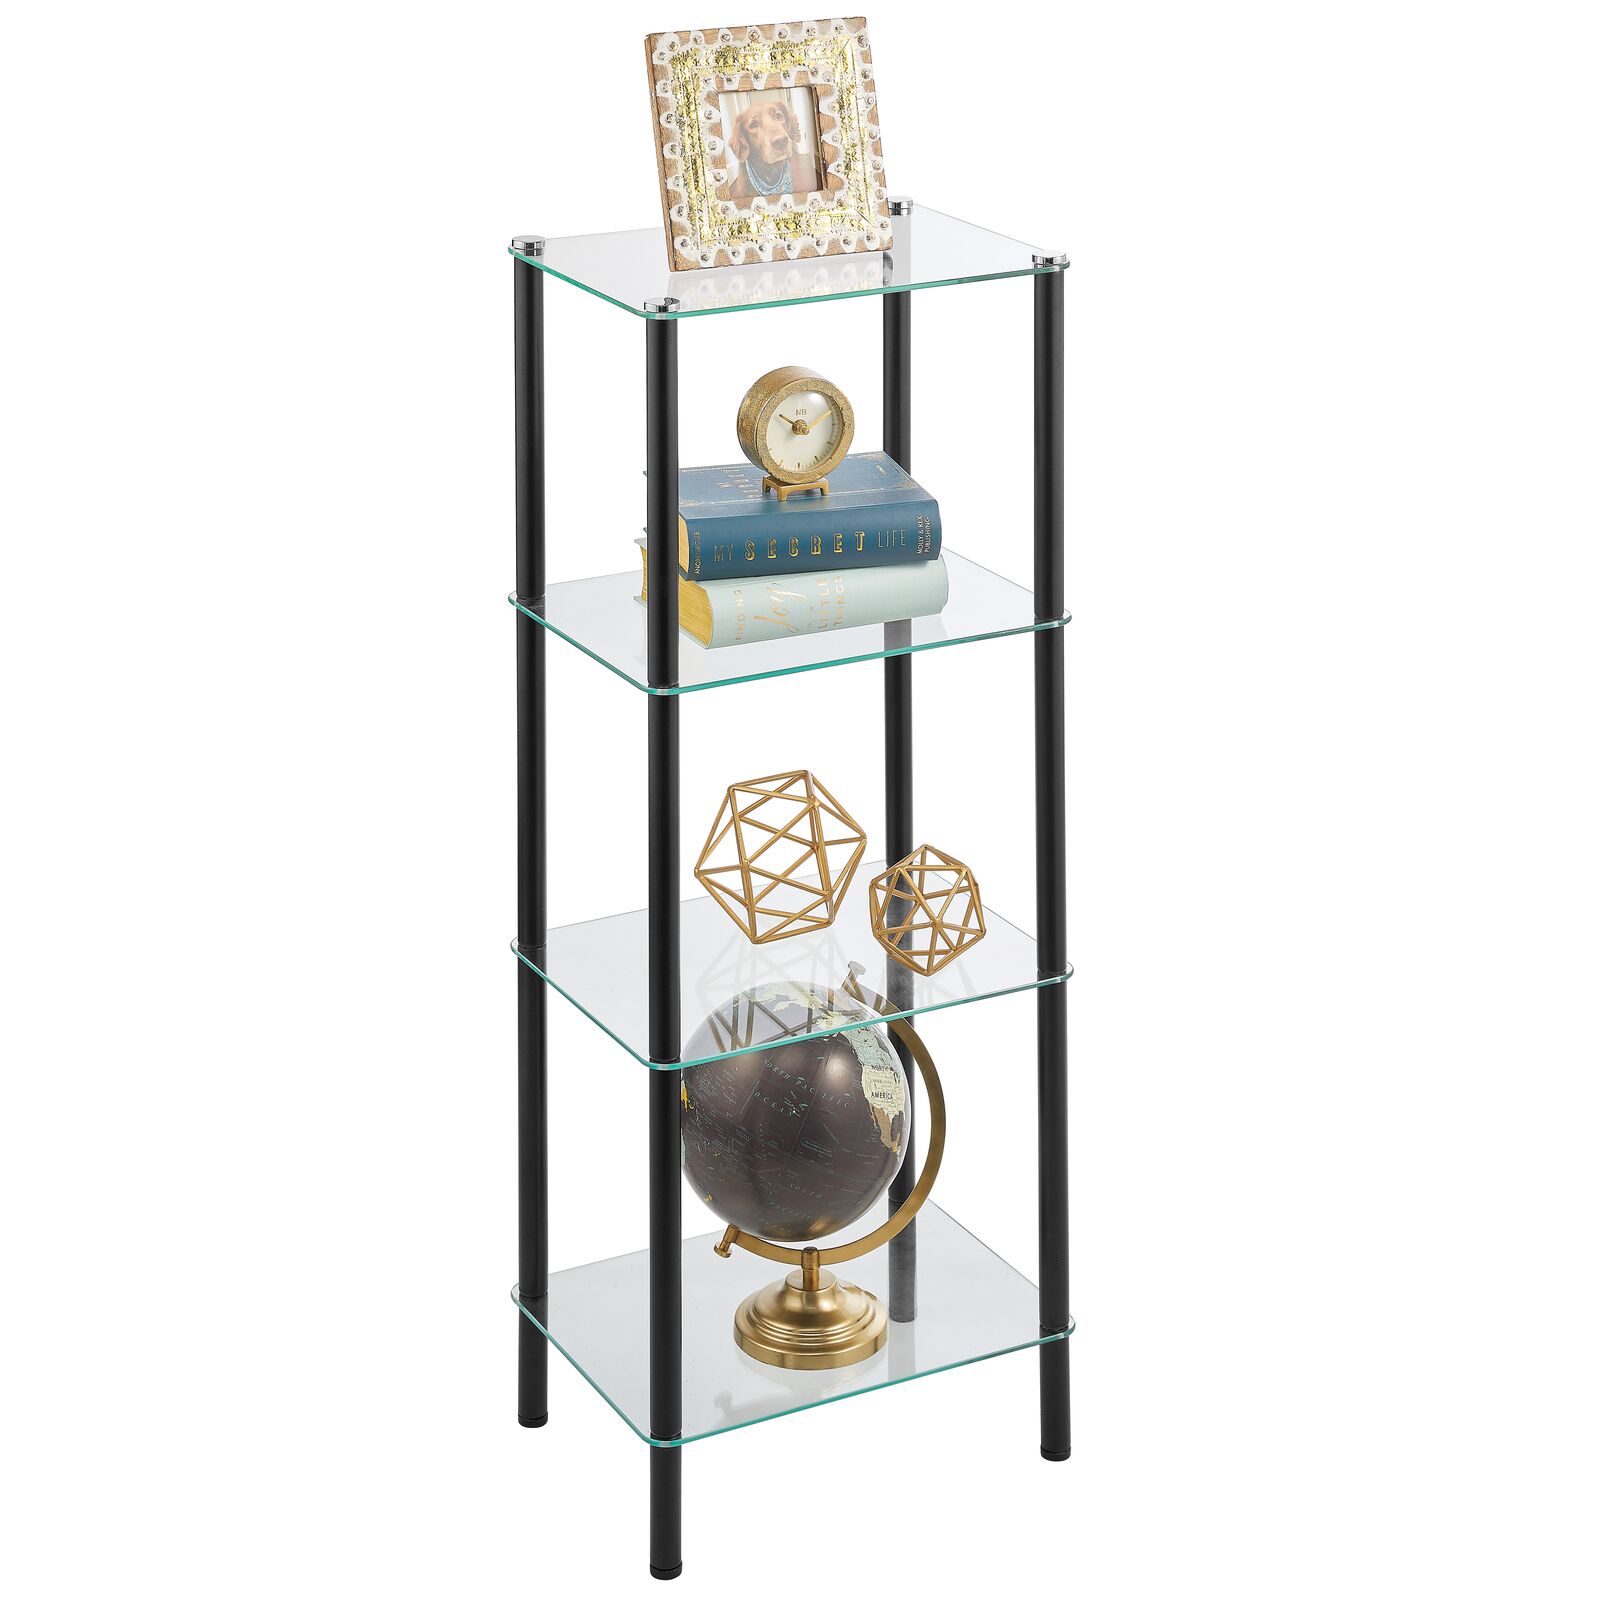 MDesign Tall 4-Tier Glass And Metal Freestanding Shelf Organizer Display  Unit Narrow Shelves For Bathroom, Kitchen, Bedroom, Office Open Shelving  ウォールシェルフ